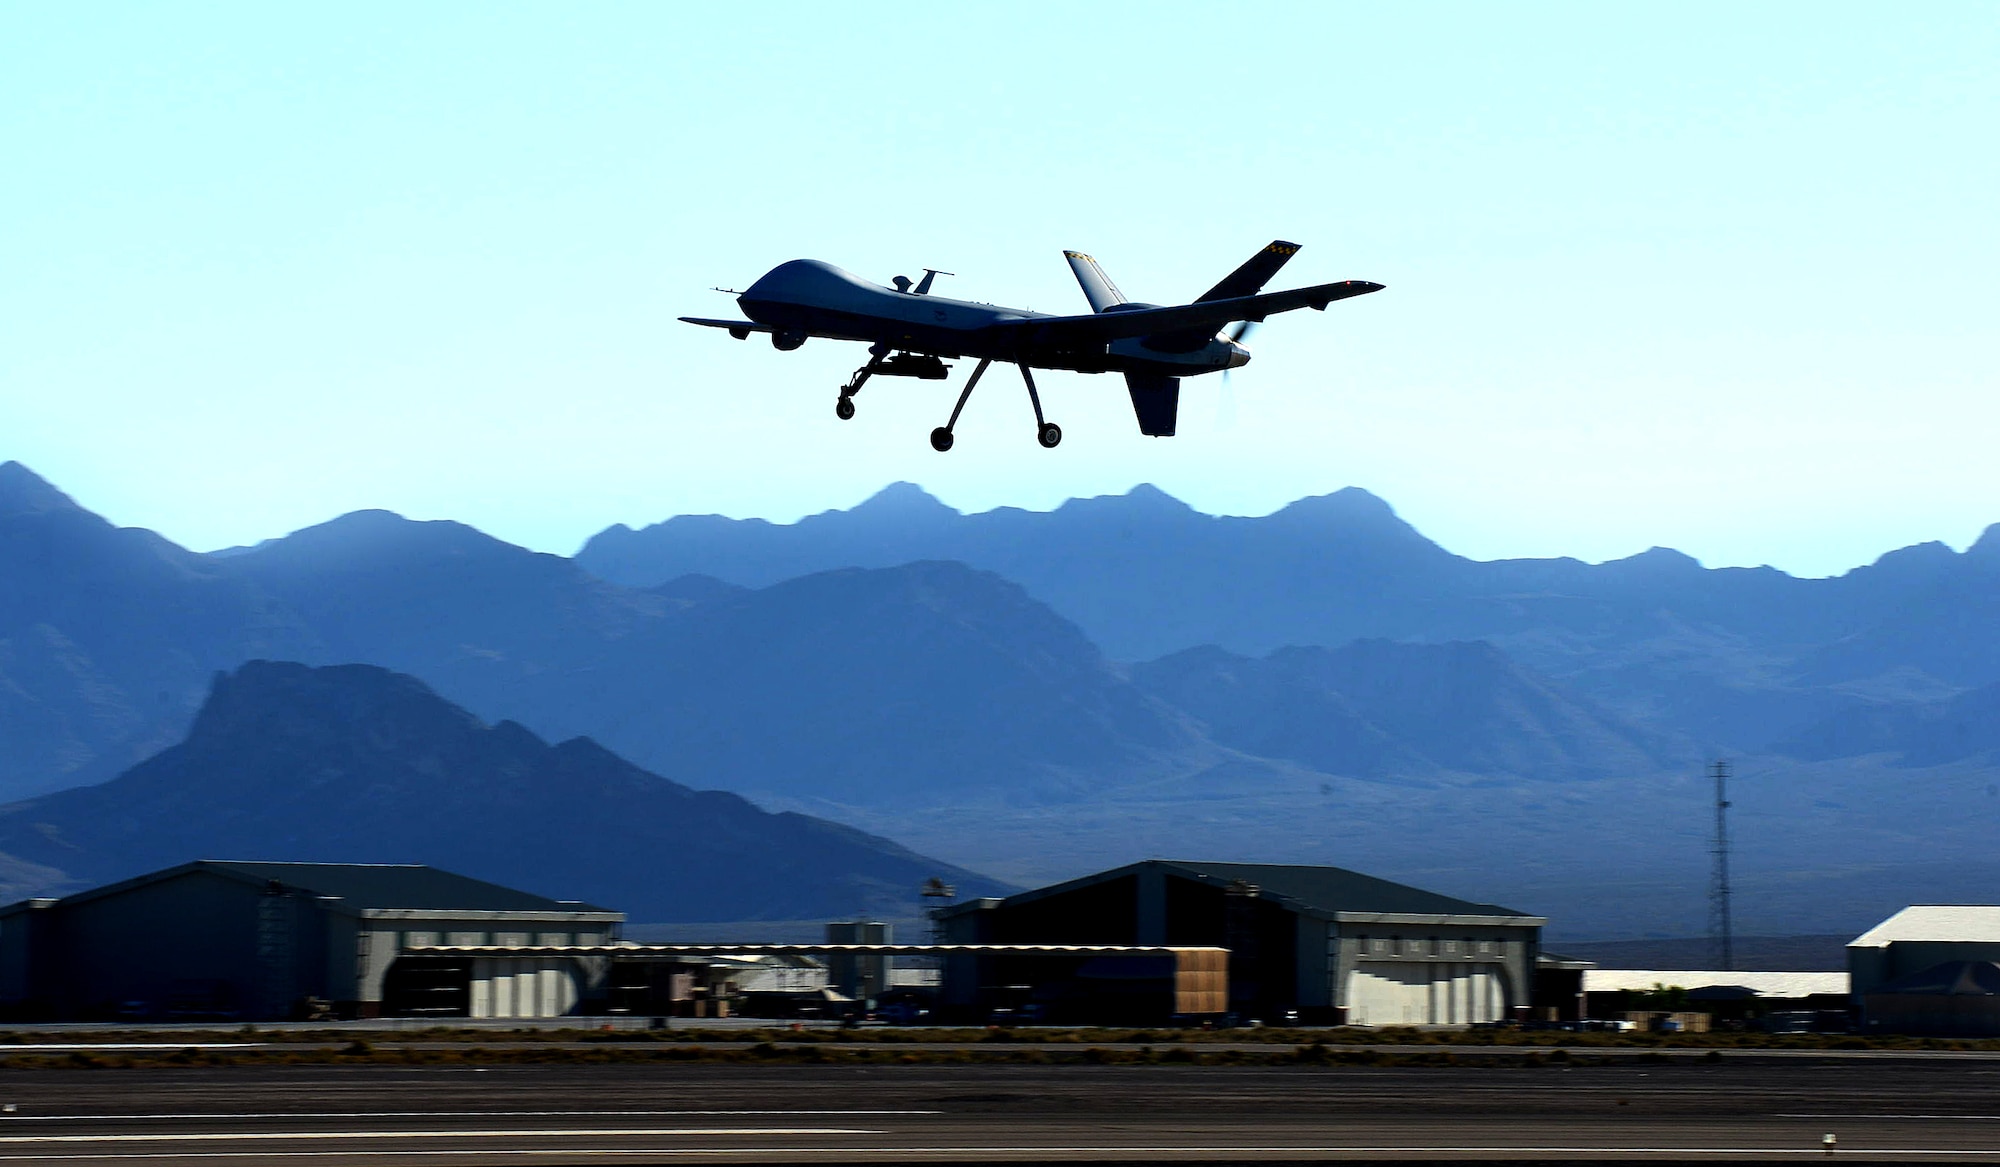 An MQ-9 Reaper performs touch-and-go flight patterns June 13, 2014, at Creech Air Force Base, Nev. The Reaper is an armed, multi-mission, medium-altitude, long-endurance remotely piloted aircraft that is employed primarily as an intelligence-collection asset and secondarily against dynamic execution targets. (U.S. Air Force photo/Senior Master Sgt. Cecilio Ricardo)